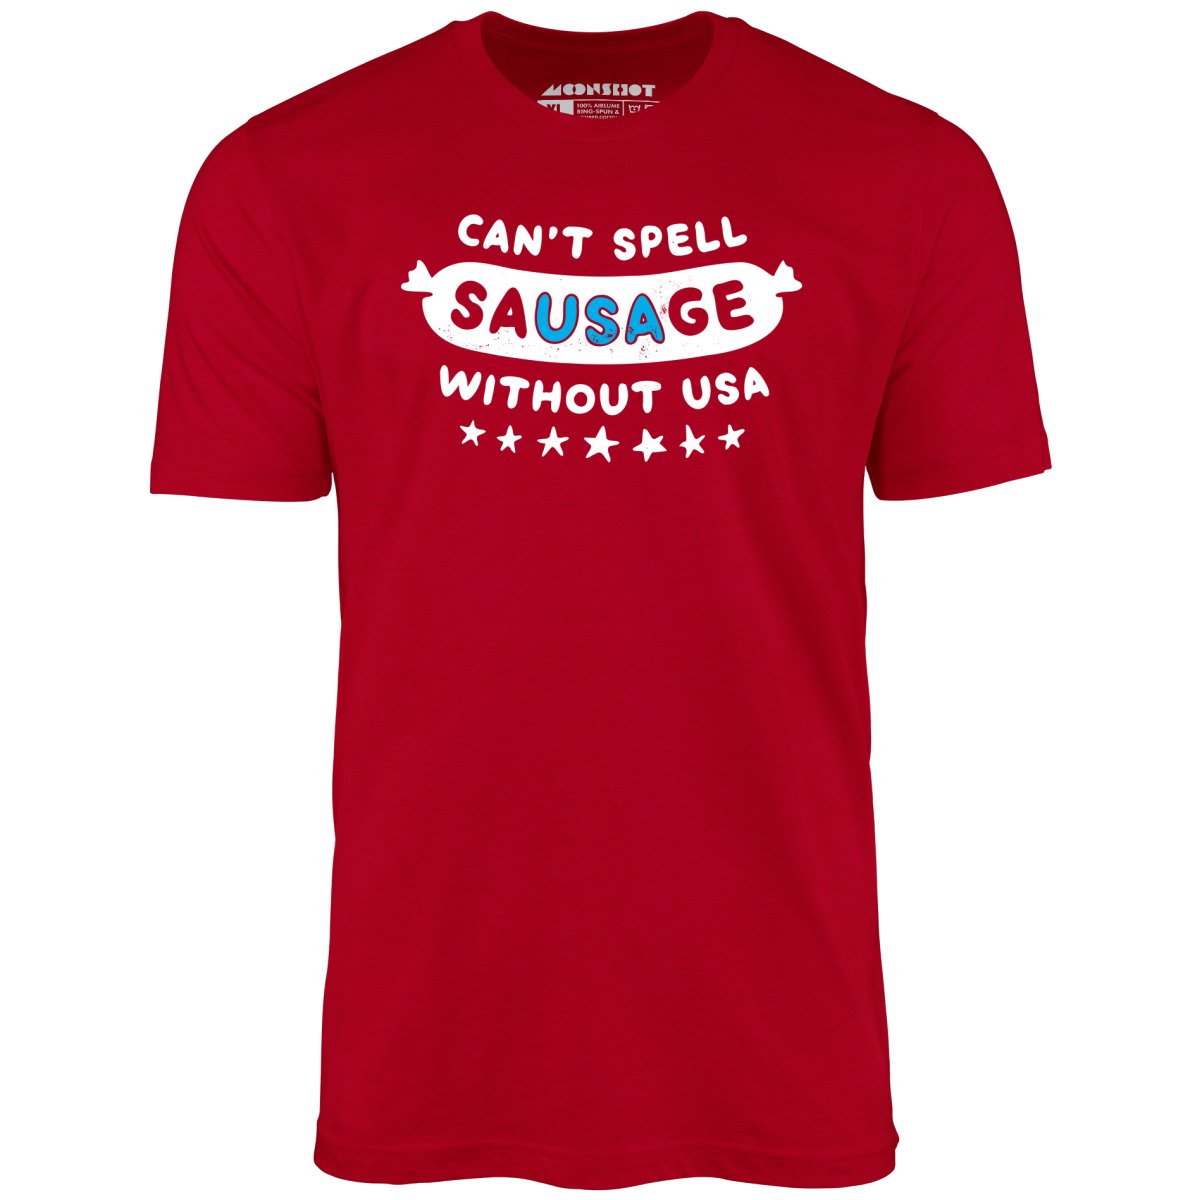 Can't Spell Sausage Without USA - Unisex T-Shirt